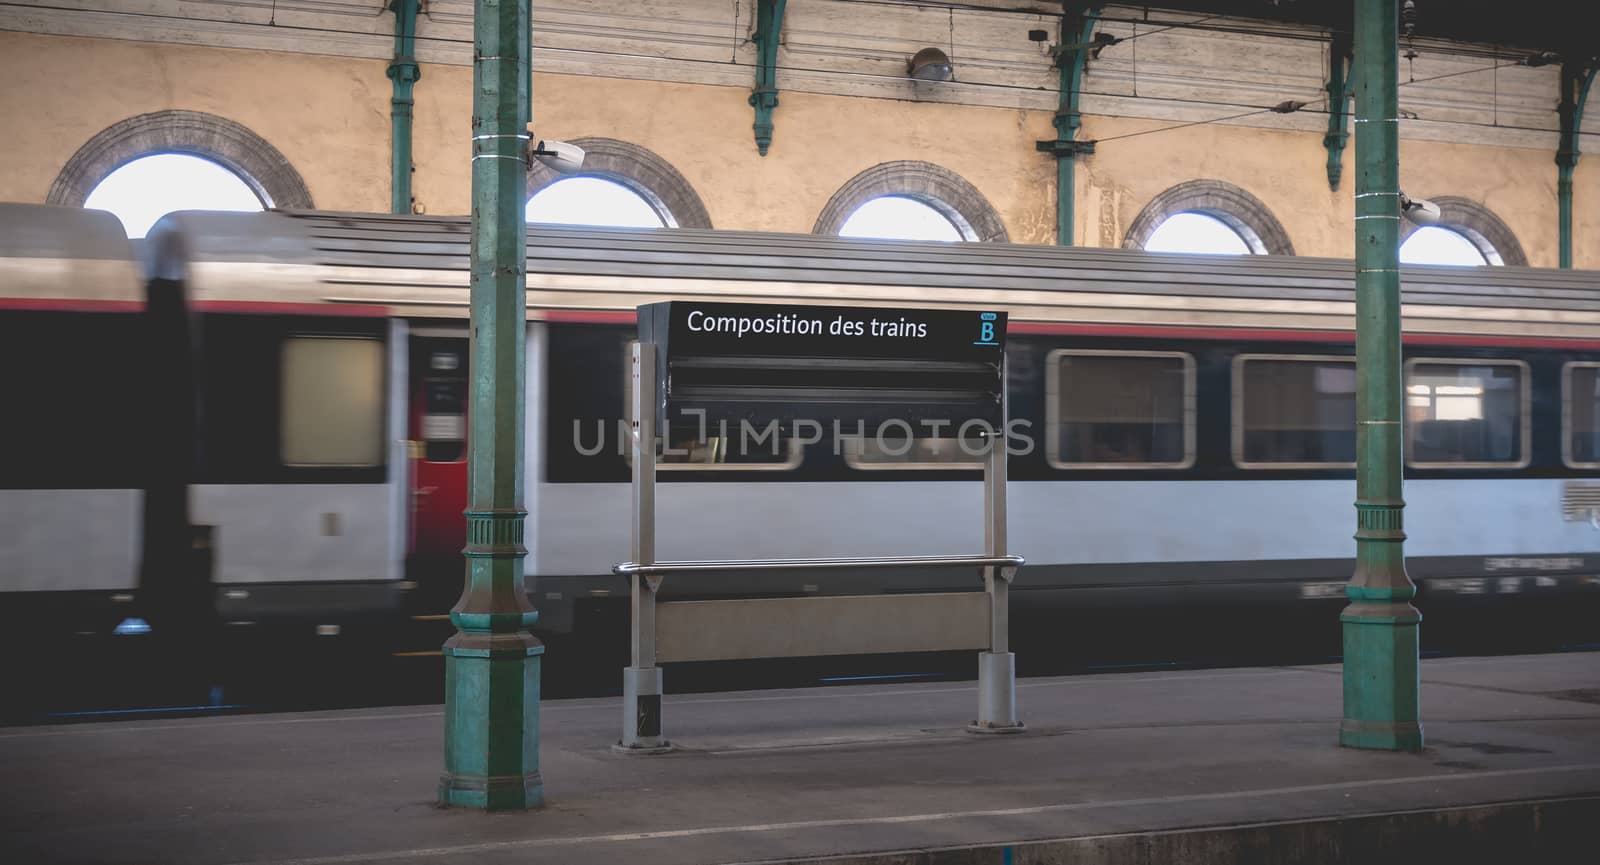 Sete, France - January 4, 2019: Scoreboard showing the composition of trains in the train station on a winter day